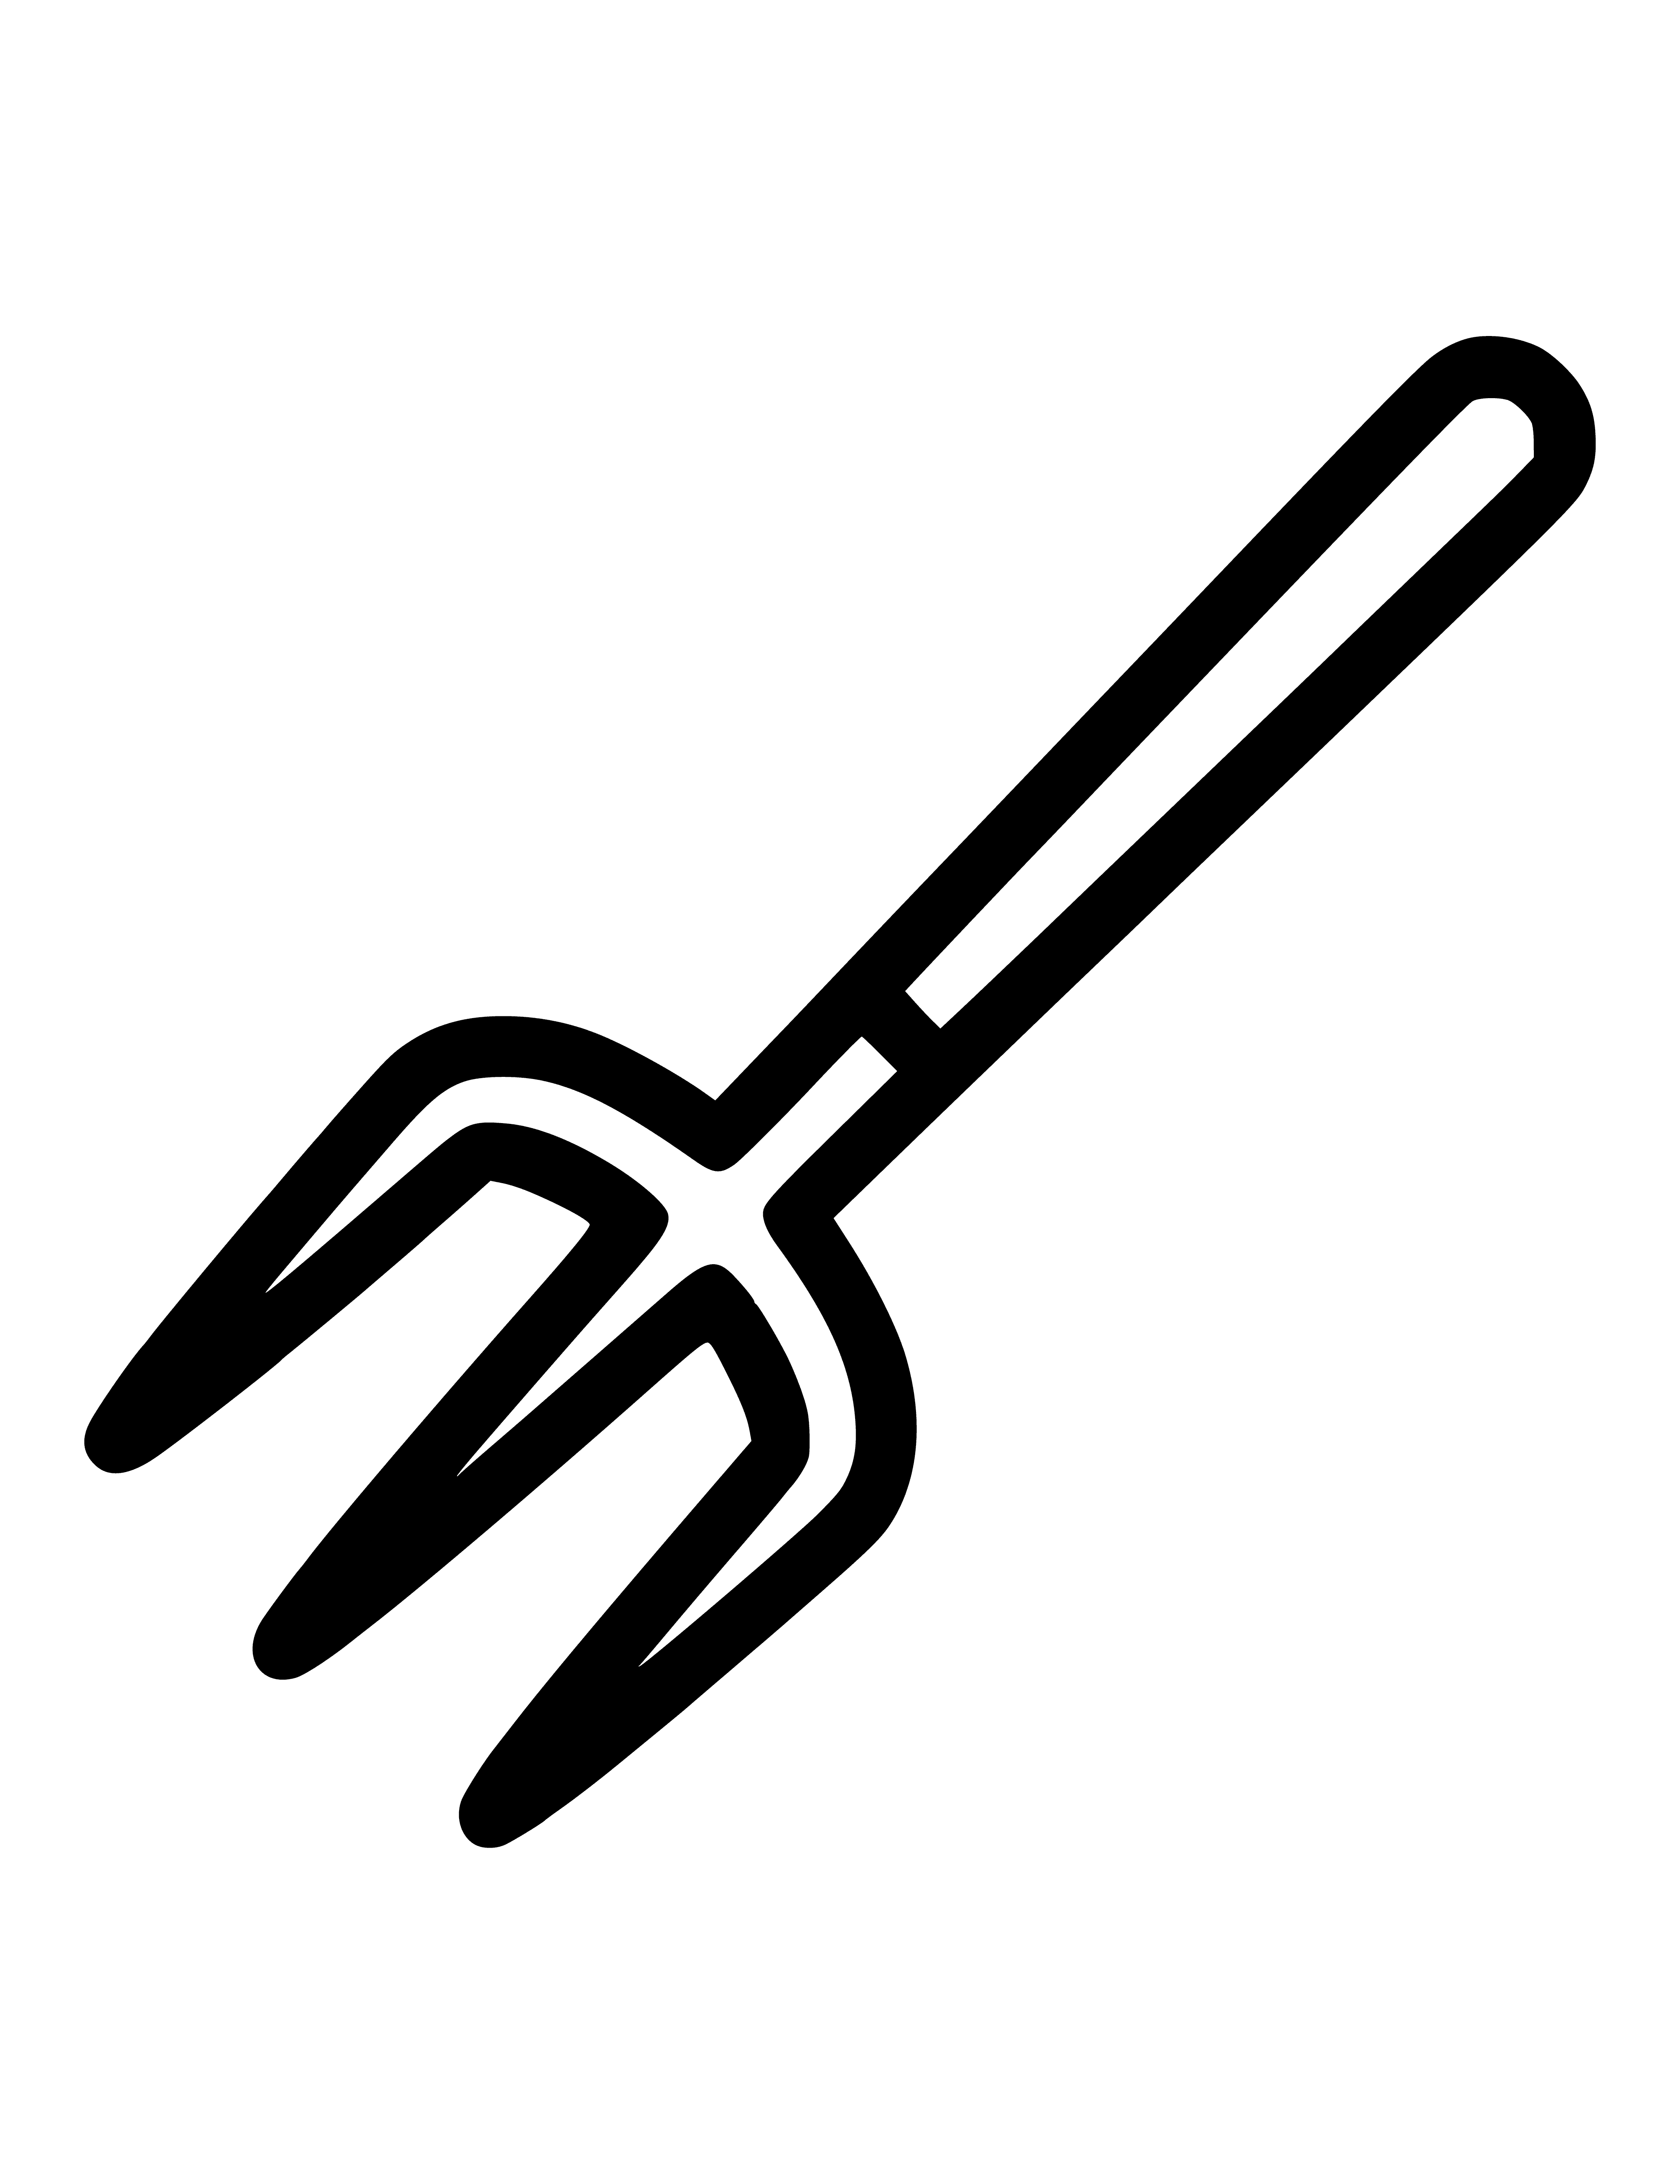 coloring page: Coloring page features a silver-colored pitchfork with three tines spread out and curved, a long thin handle with a slightly flared end.